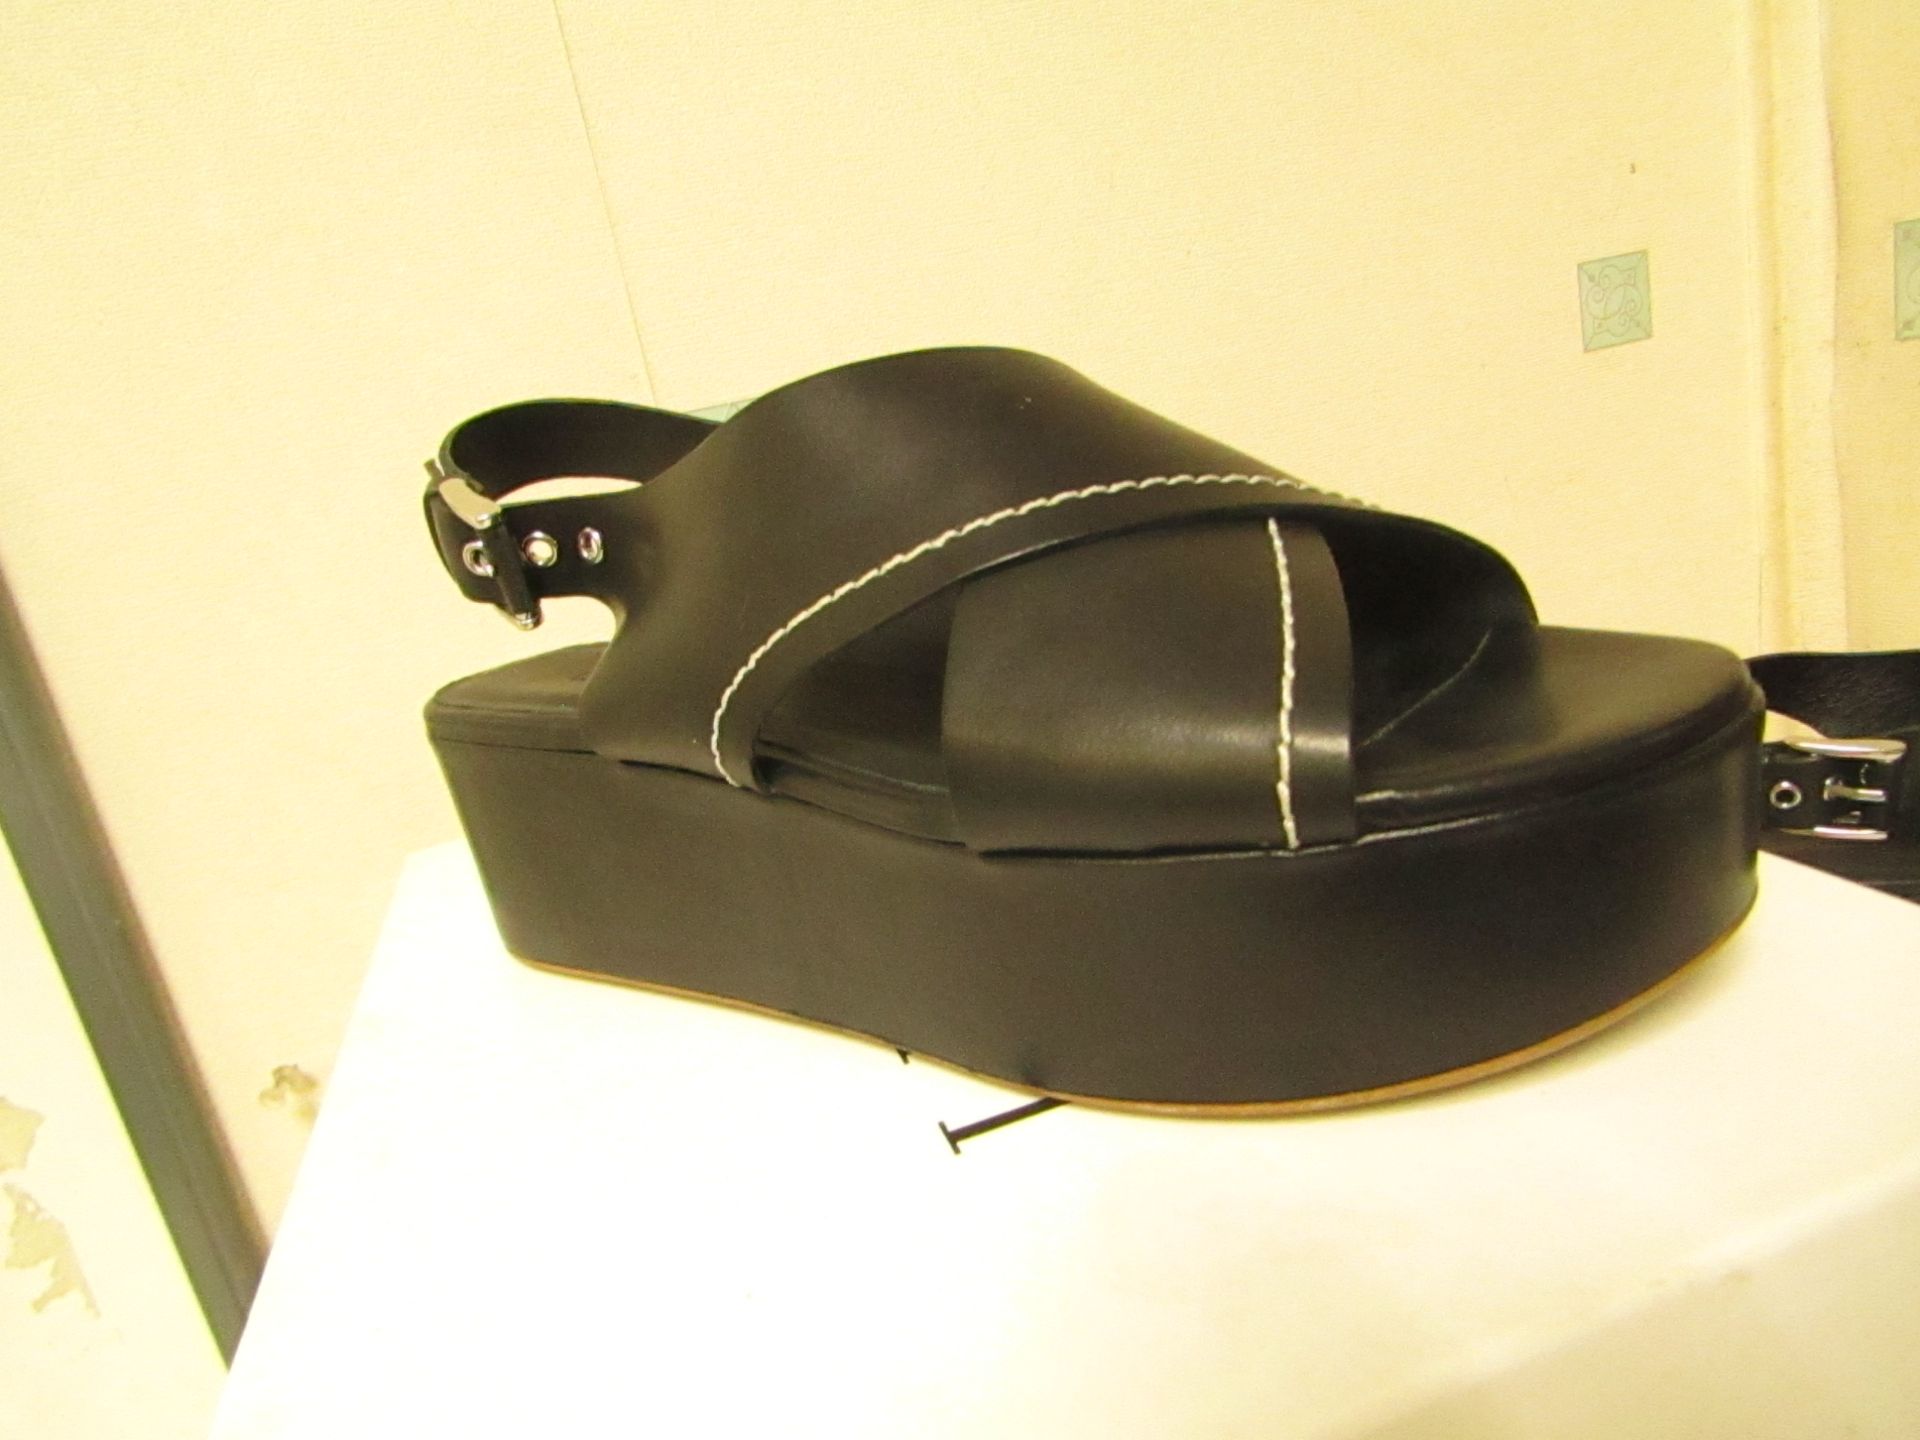 L K Bennett London Sima Black Veg Leather Shoes size 40 RRP £250 new & boxed see image for design